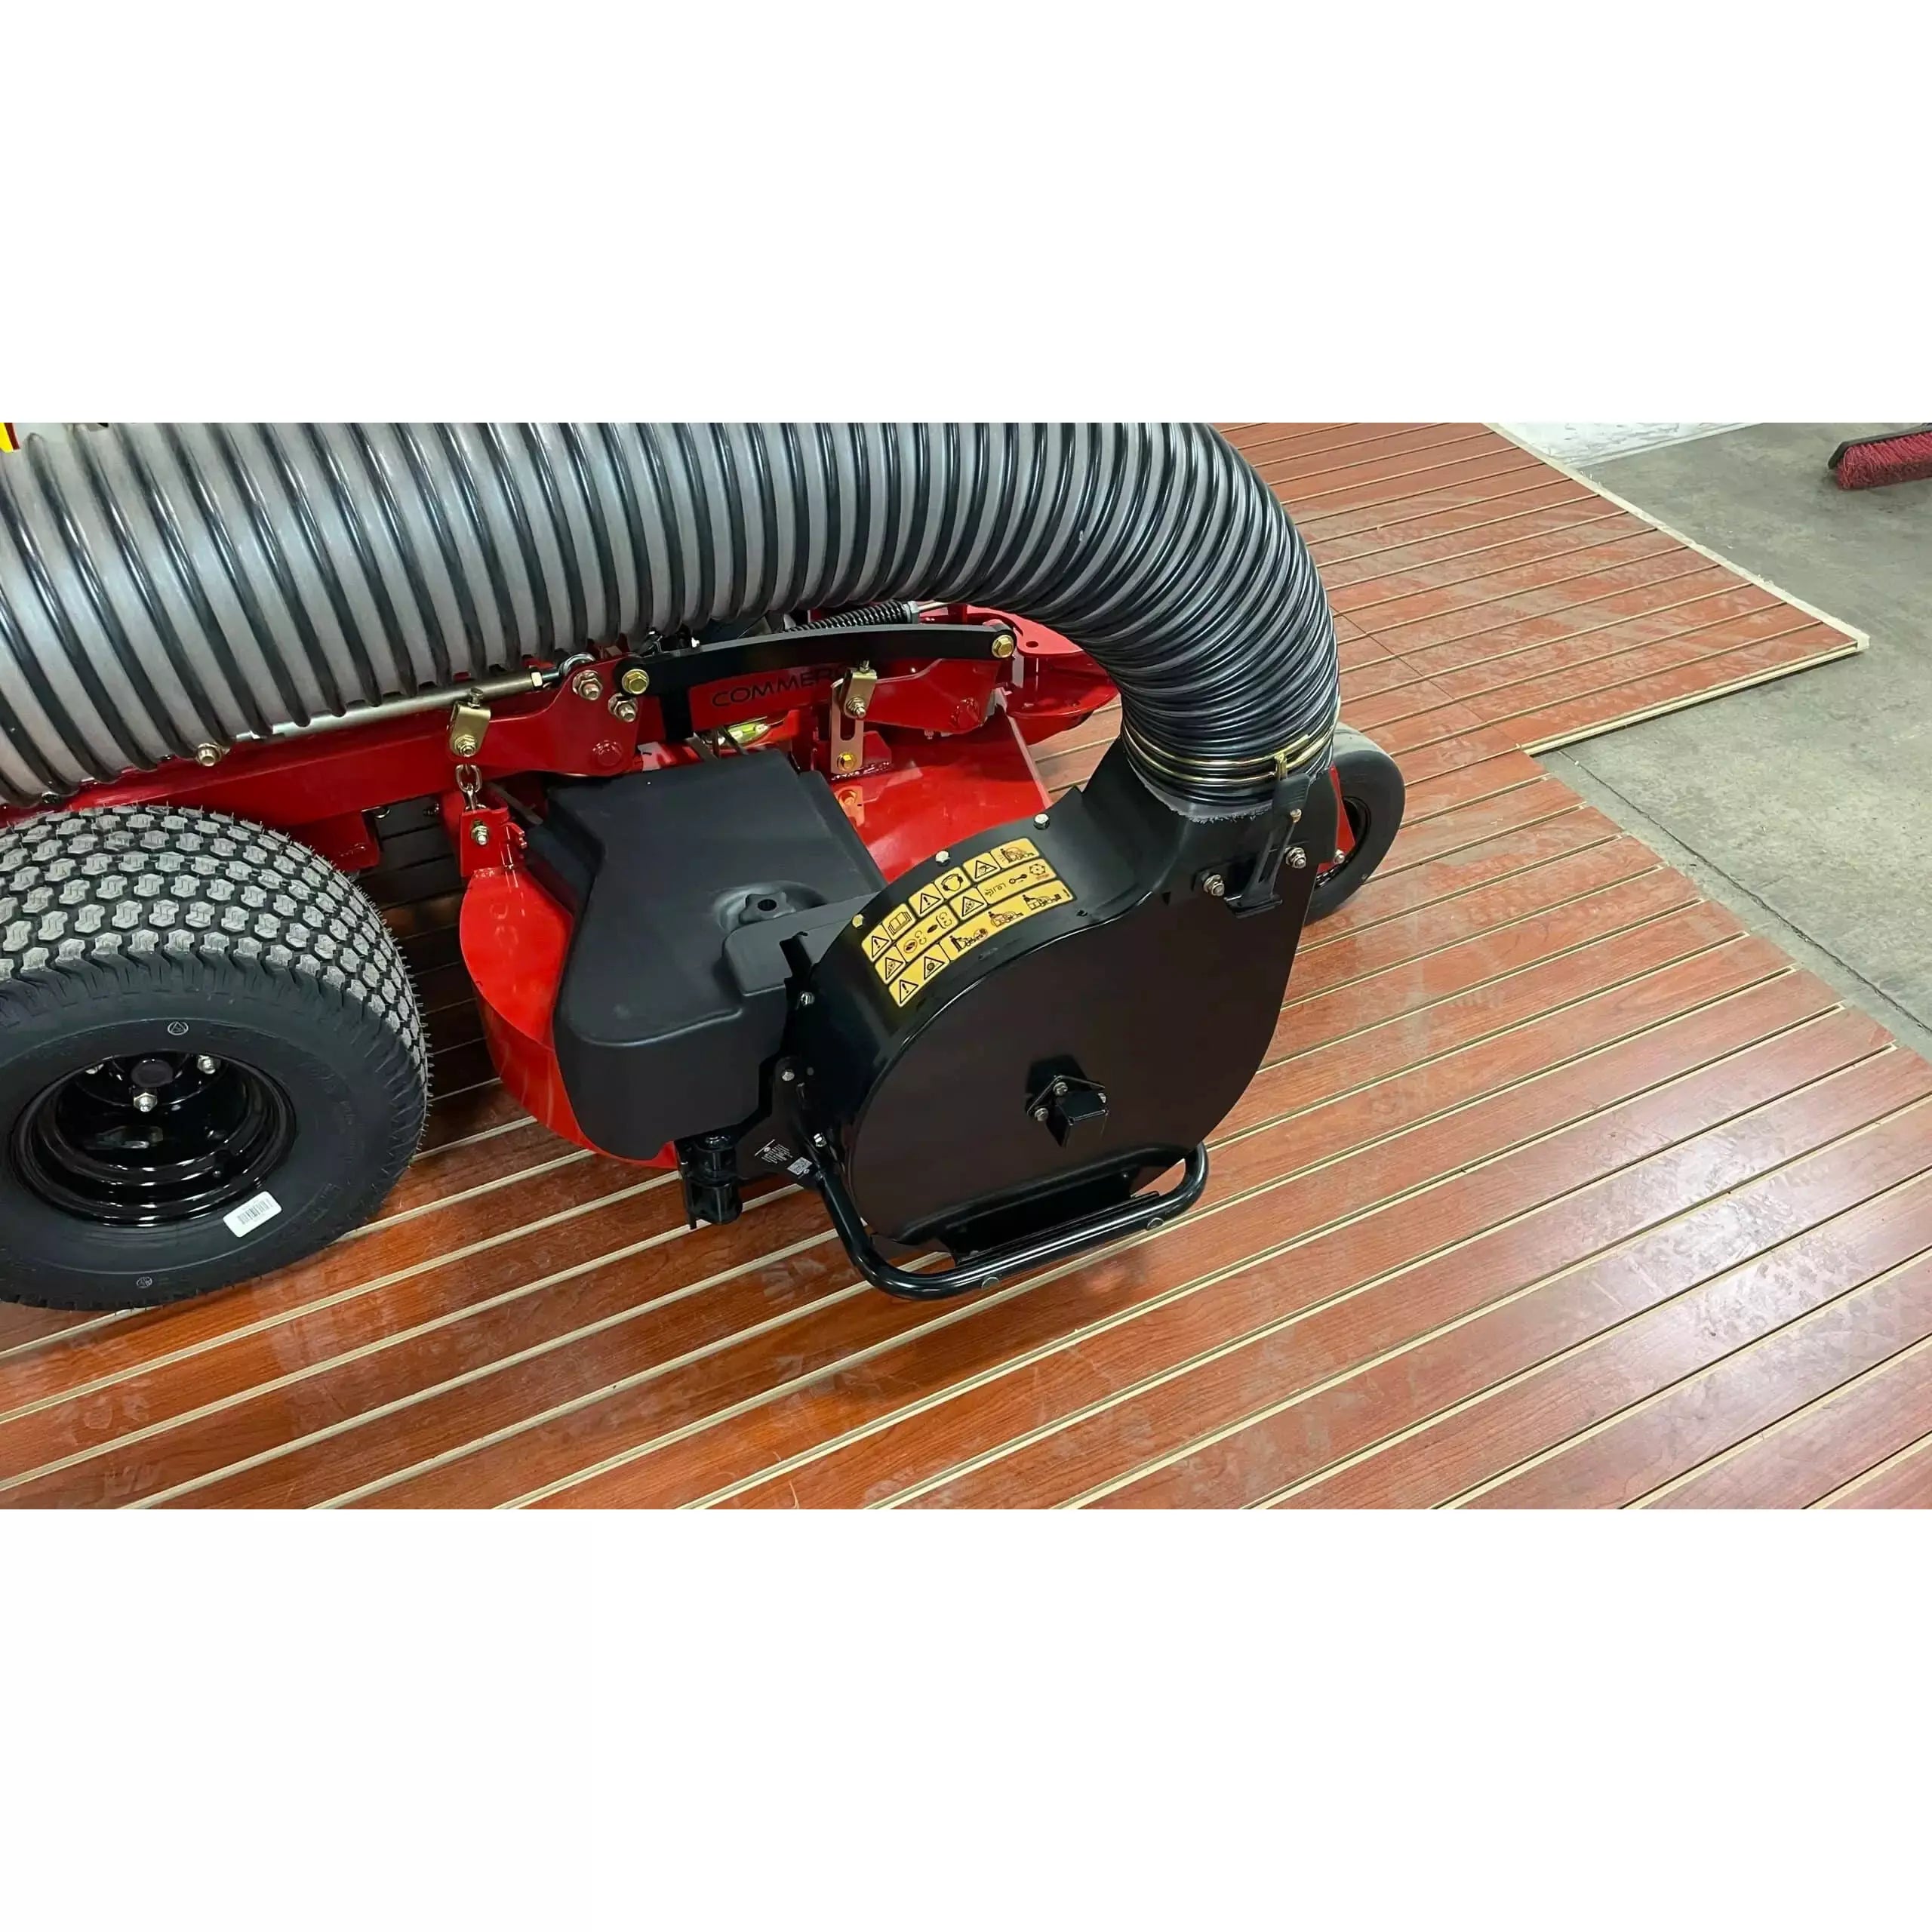 GrandStand E-Z Vac Blower & Drive Kit for 52 in. Deck